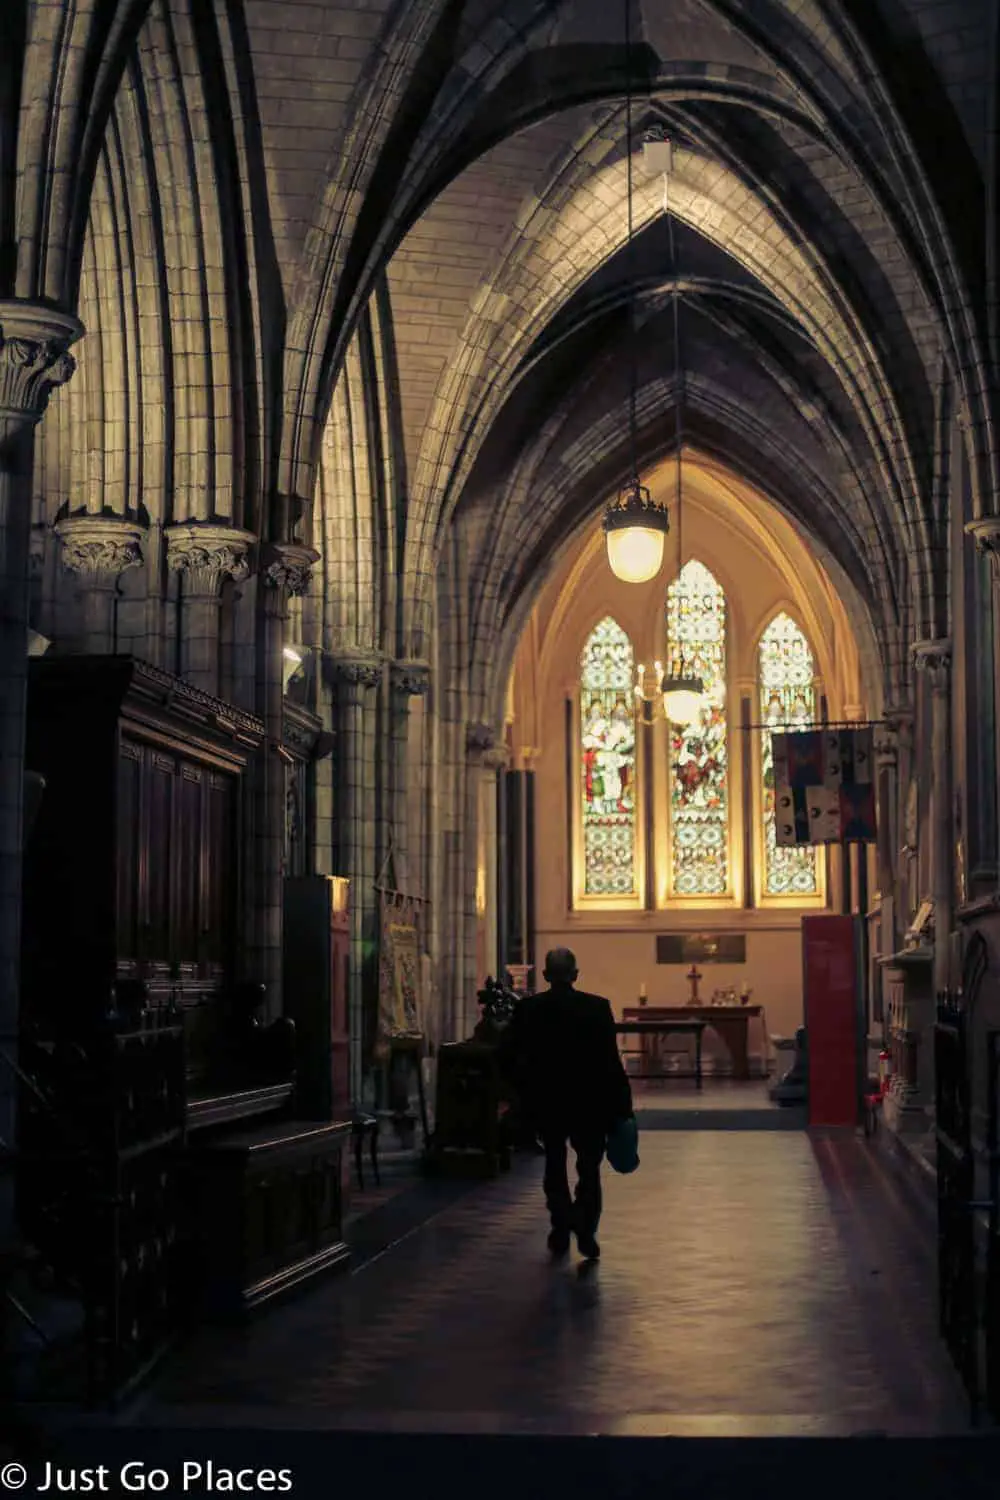 St. Patricks' Cathedral in Dublin